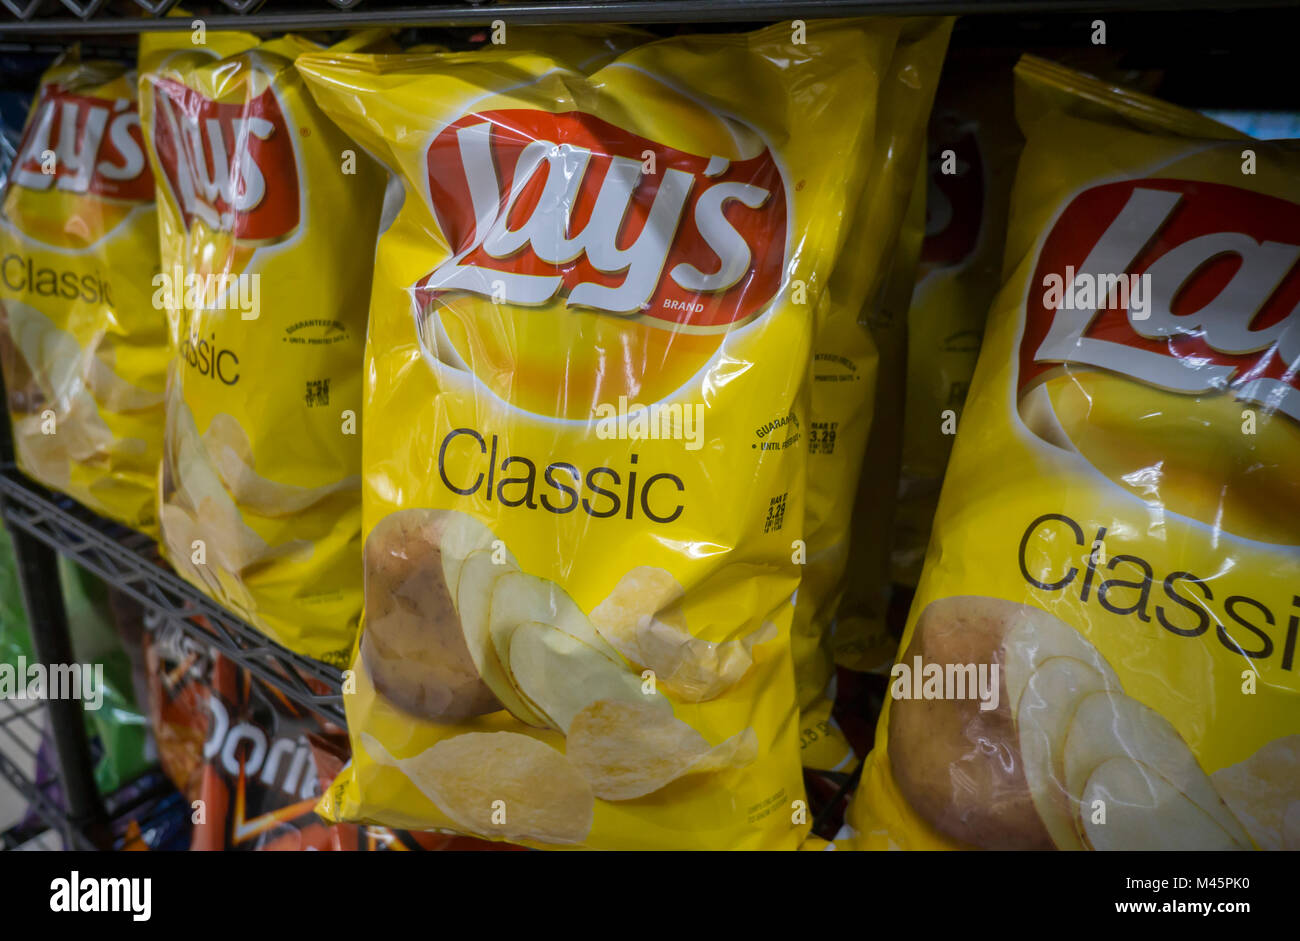 A display of PepsiCo Frito-Lay potato chip snacks in a supermarket in New York on Monday, February 12, 2018. PepsiCo is expected to release its fourth-quarter earnings prior to the opening bell on February 13. (Â© Richard B. Levine) Stock Photo